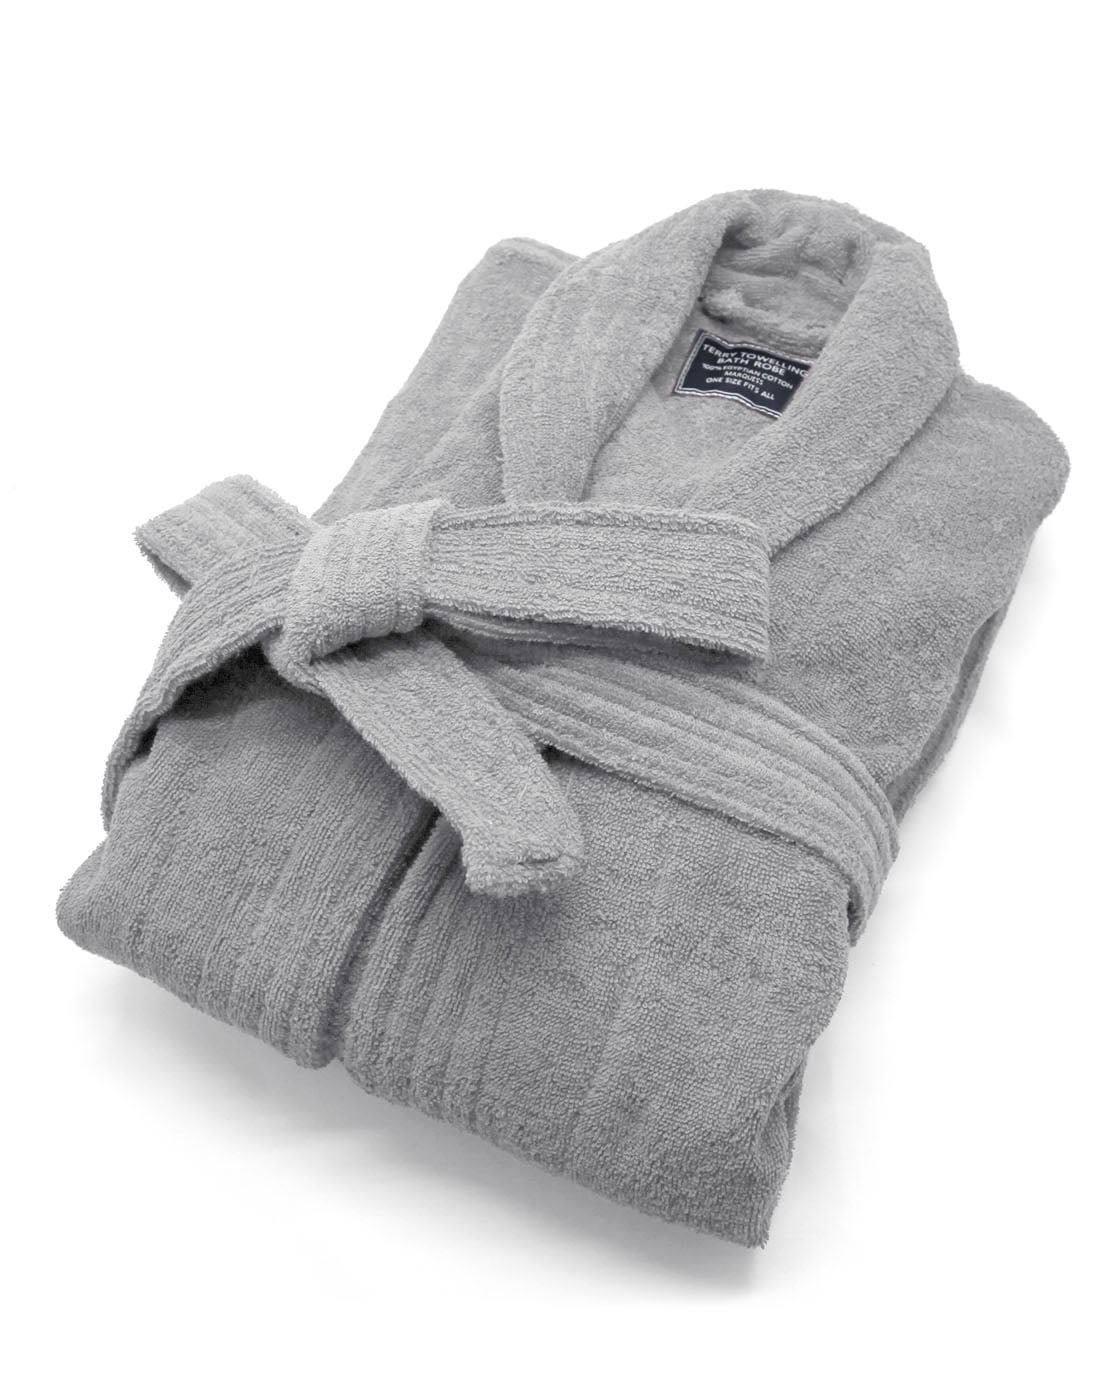 Ramesses Cotton Terry Cloth Bathrobe for Men Women Silver One Size Fits ...